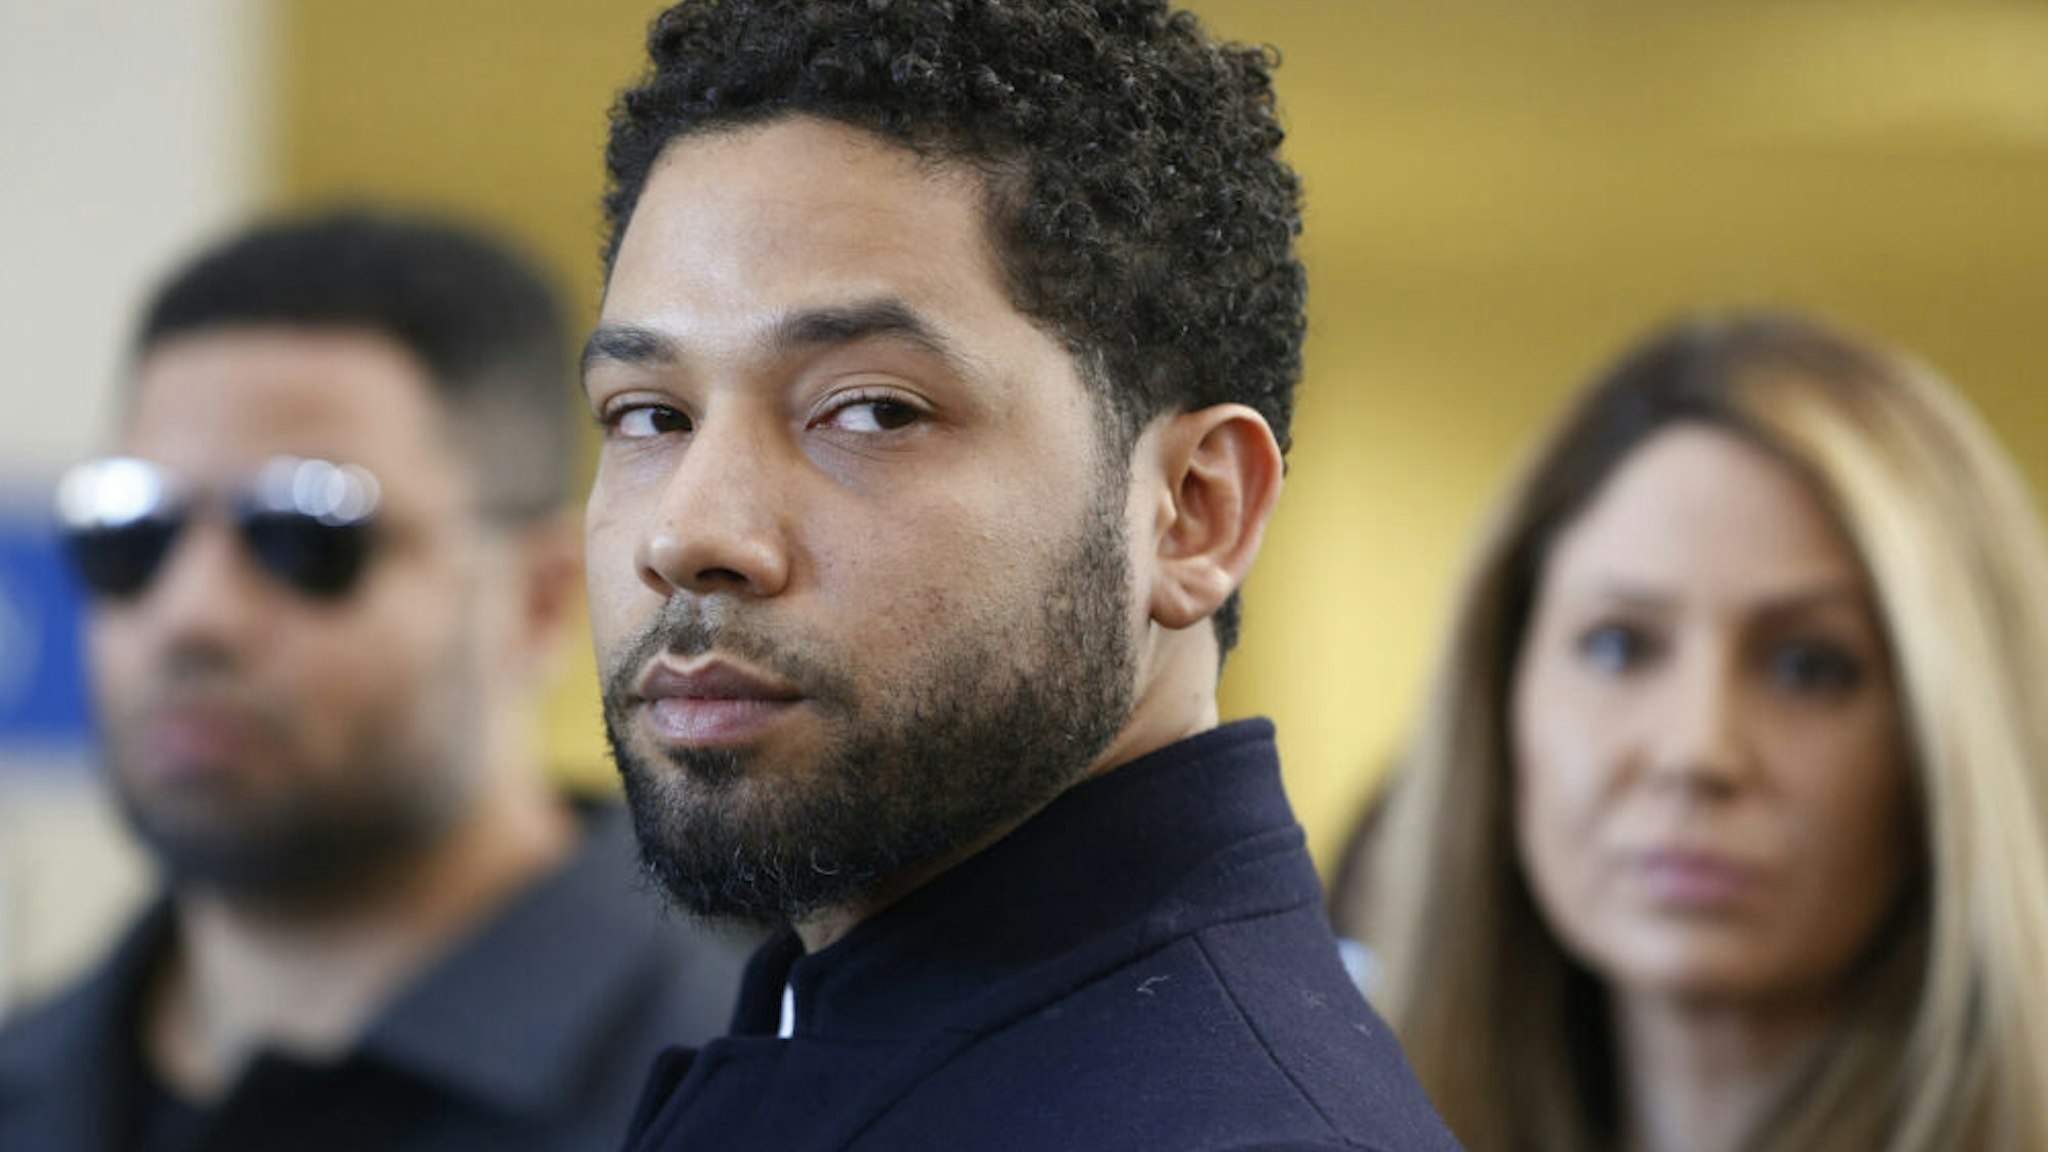 CHICAGO, ILLINOIS - MARCH 26: Actor Jussie Smollett after his court appearance at Leighton Courthouse on March 26, 2019 in Chicago, Illinois. This morning in court it was announced that all charges were dropped against the actor.